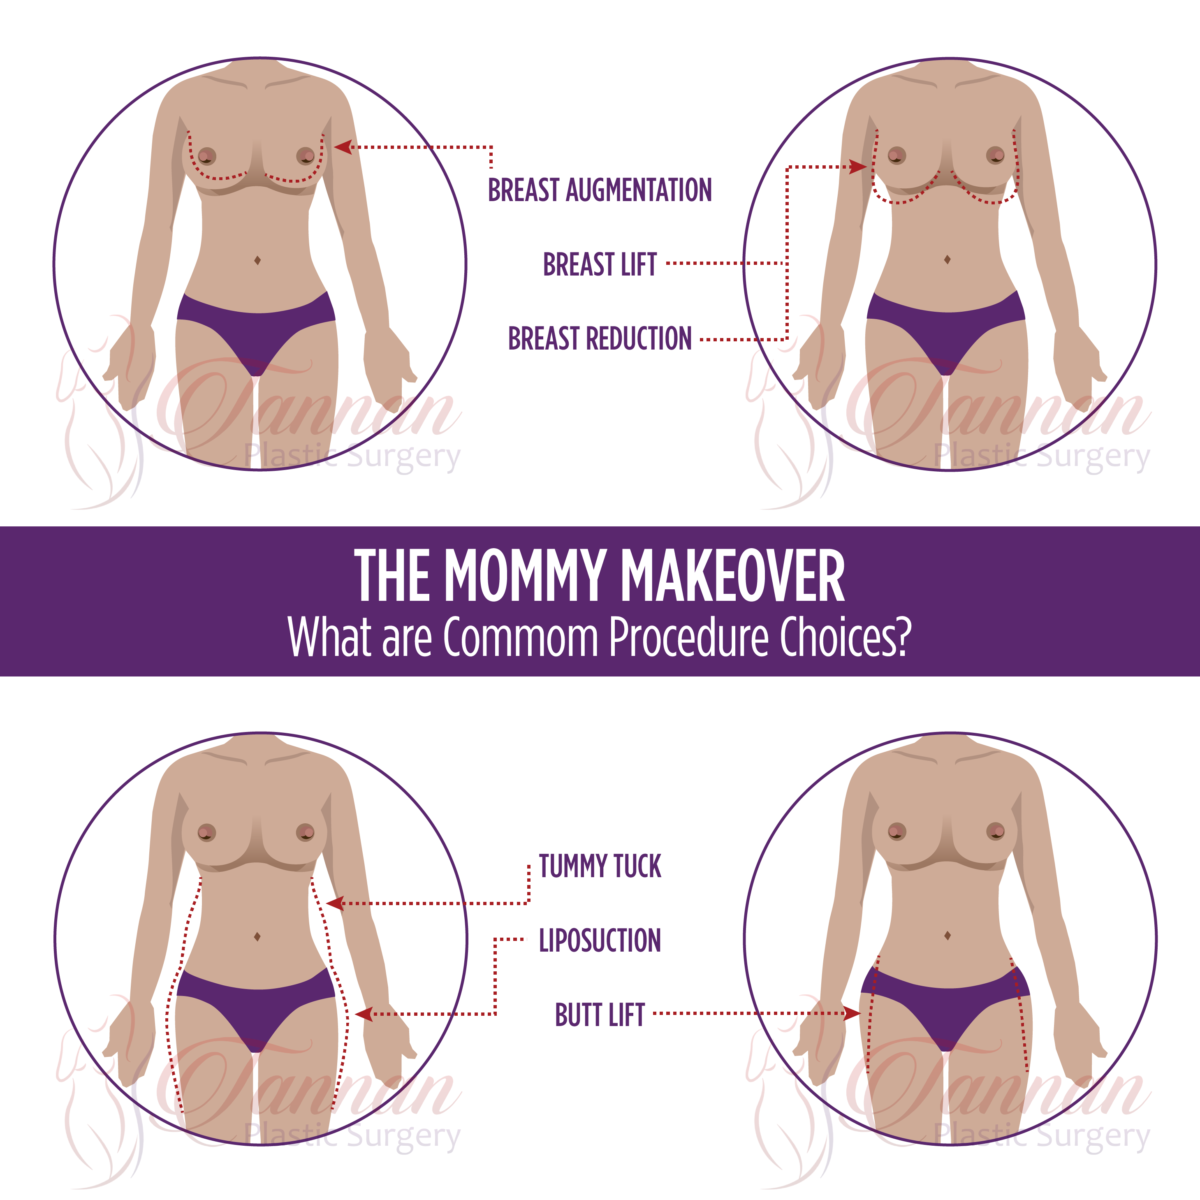 My mommy makeover patient 8 weeks post op after tummy tuck, and